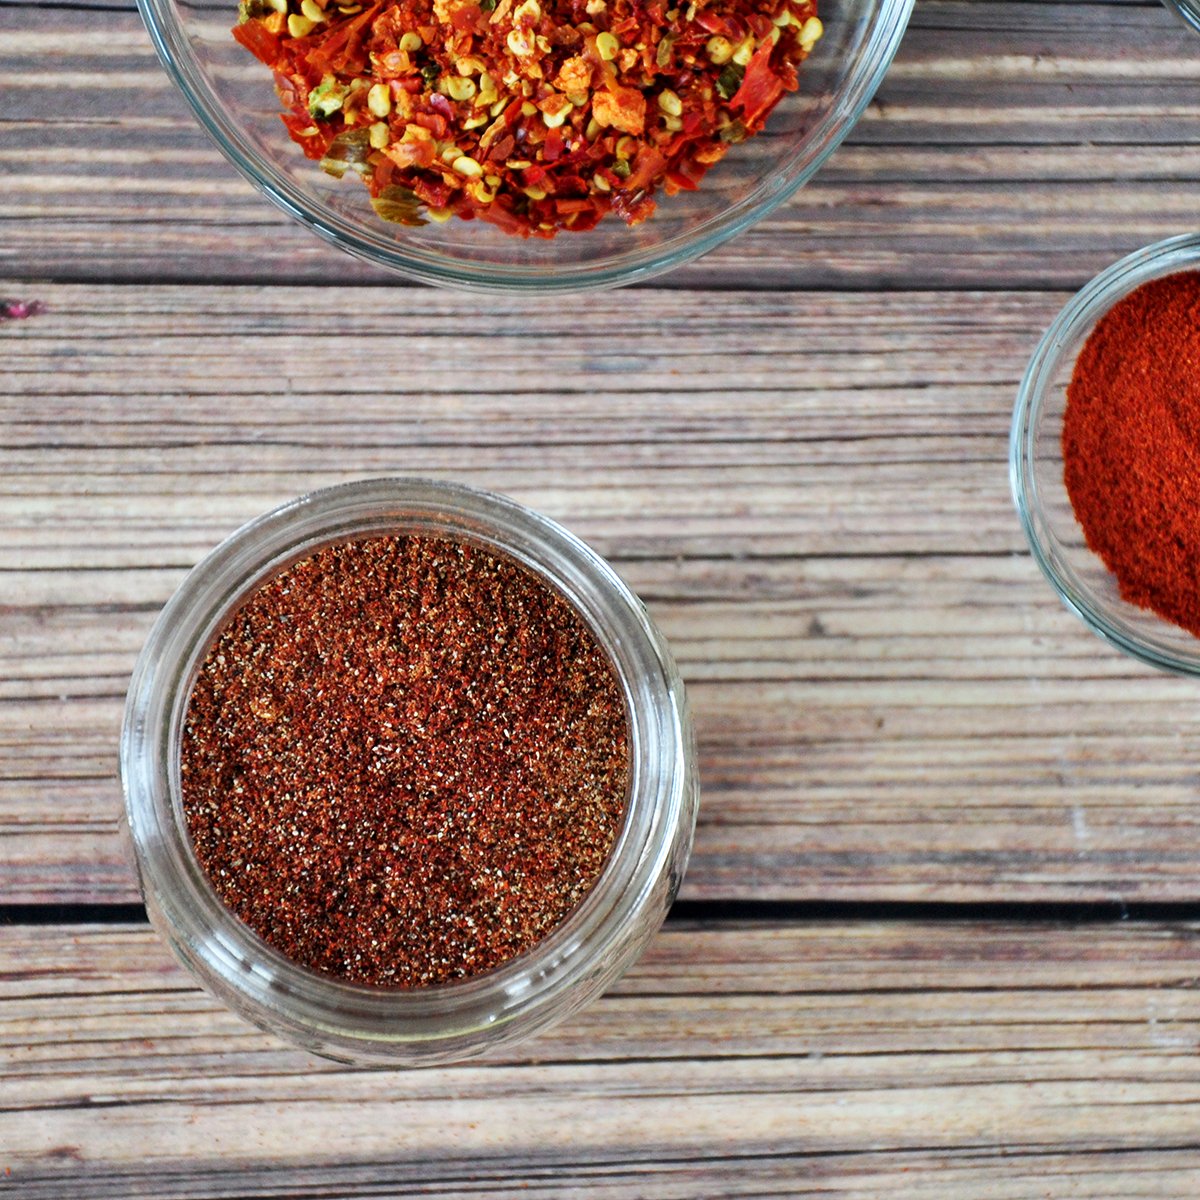 Overhead picture of homemade taco seasonings with paprika and red pepper on the side.